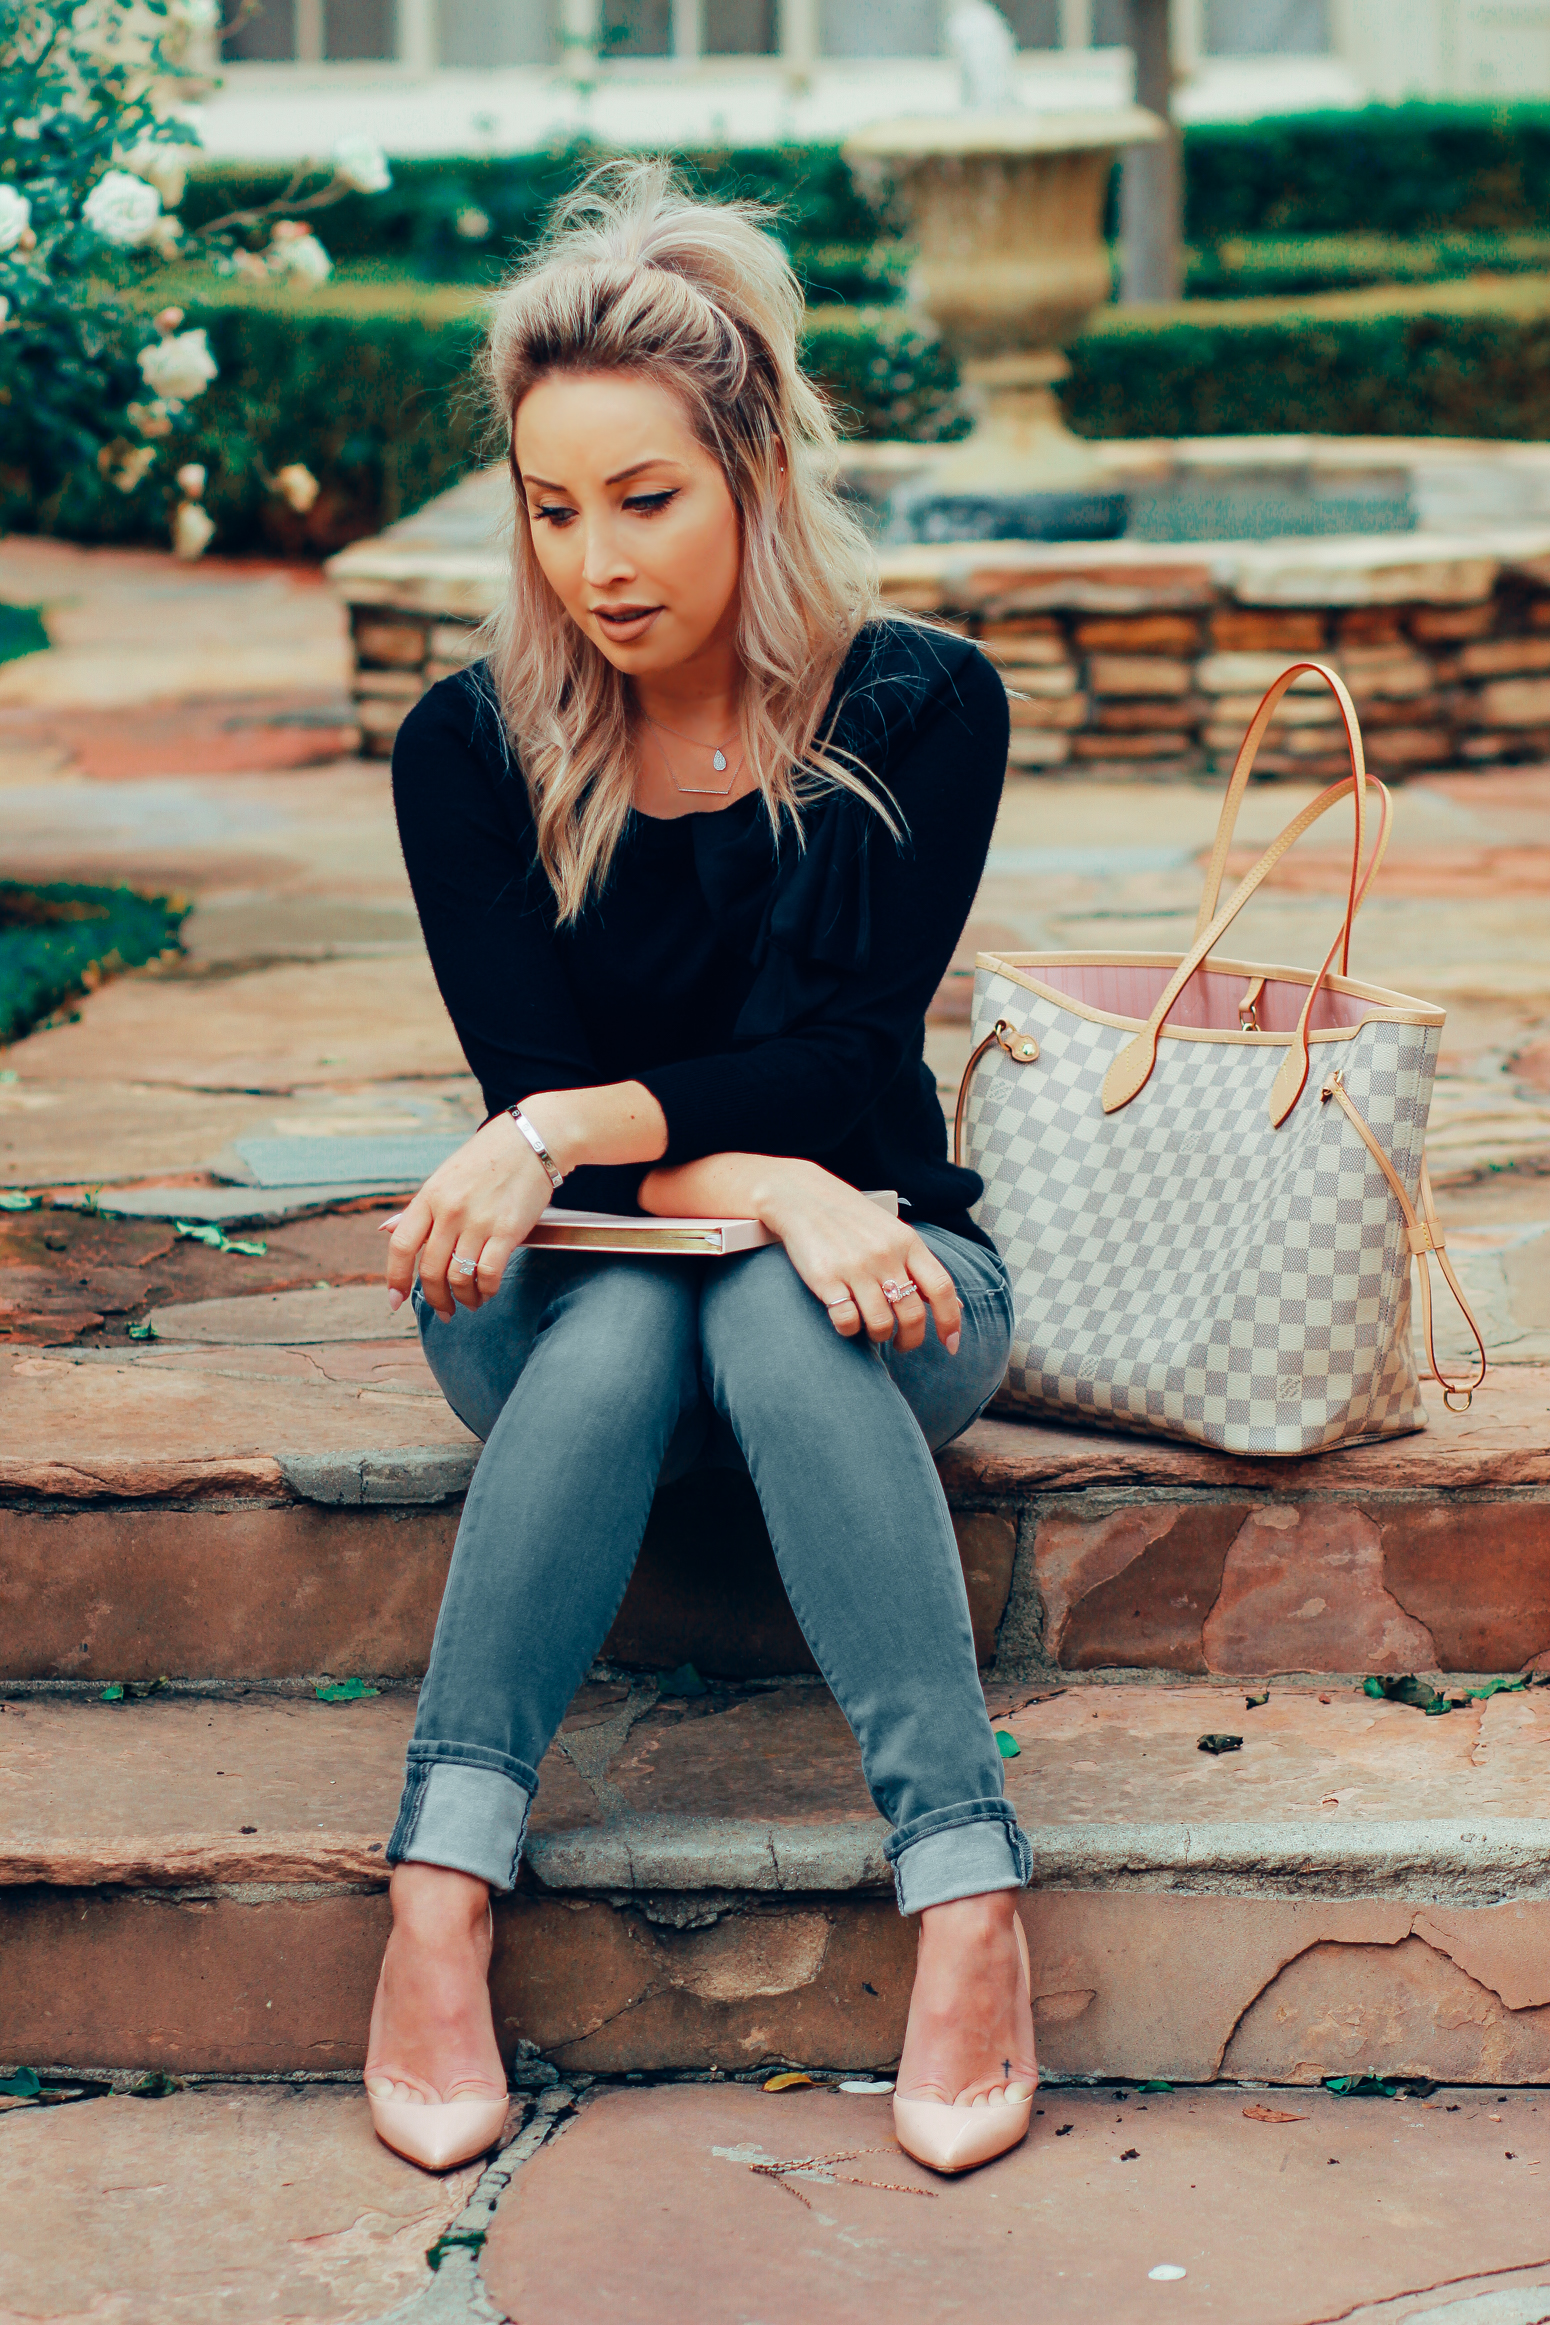 Blondie in the City | Louis Vuitton Neverfull | Hudson Jeans